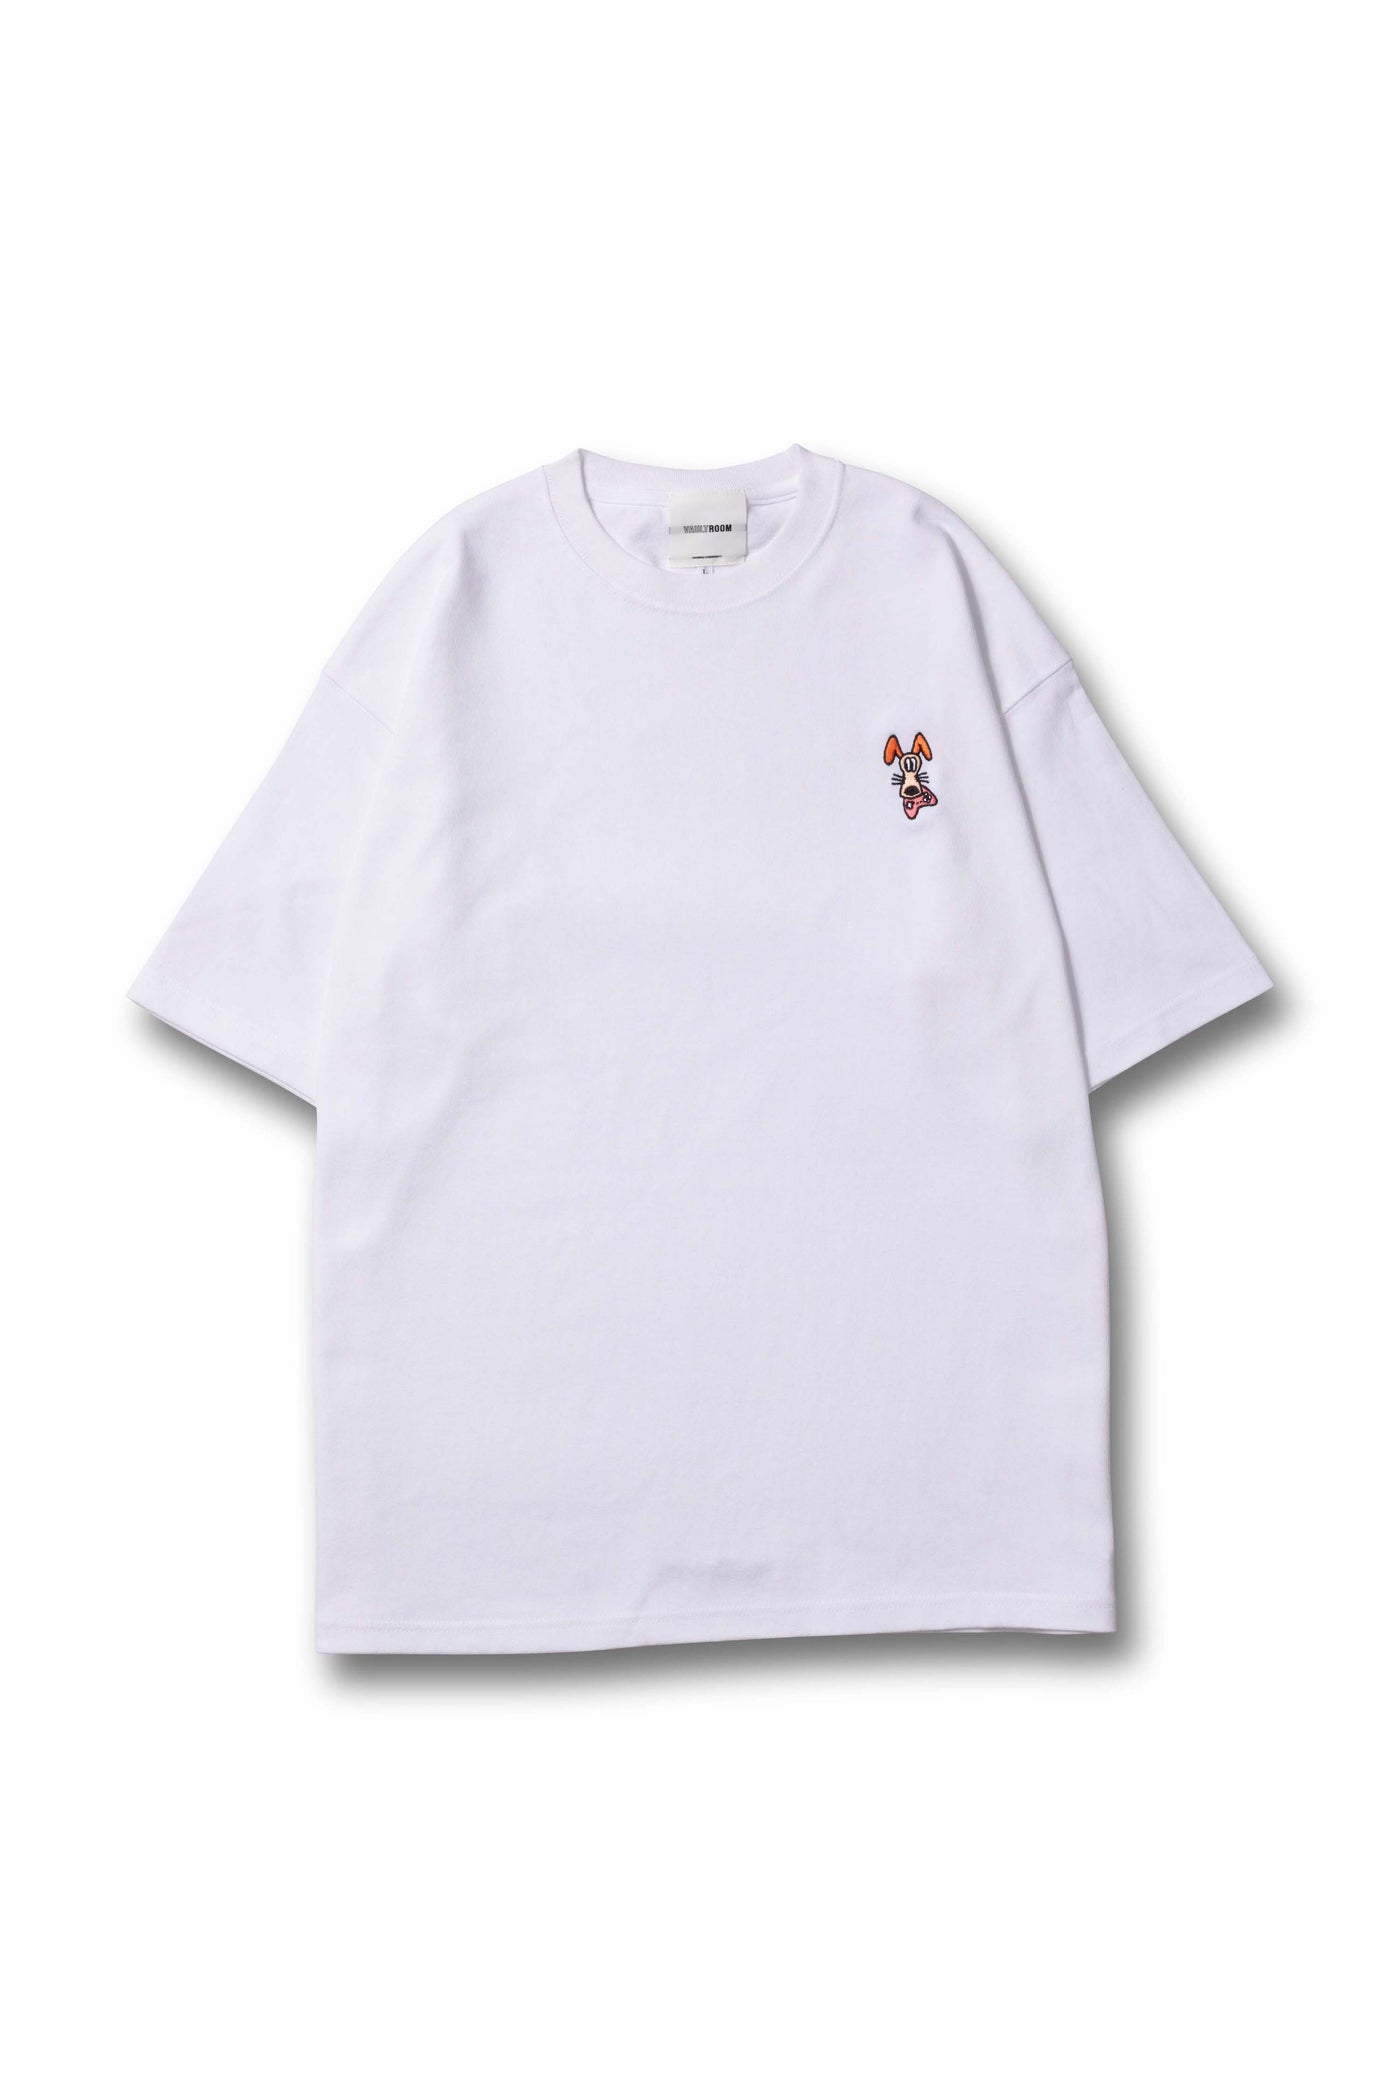 vaultroom KEY DOG ONE POINT TEE / WHT L - beaconparenting.ie